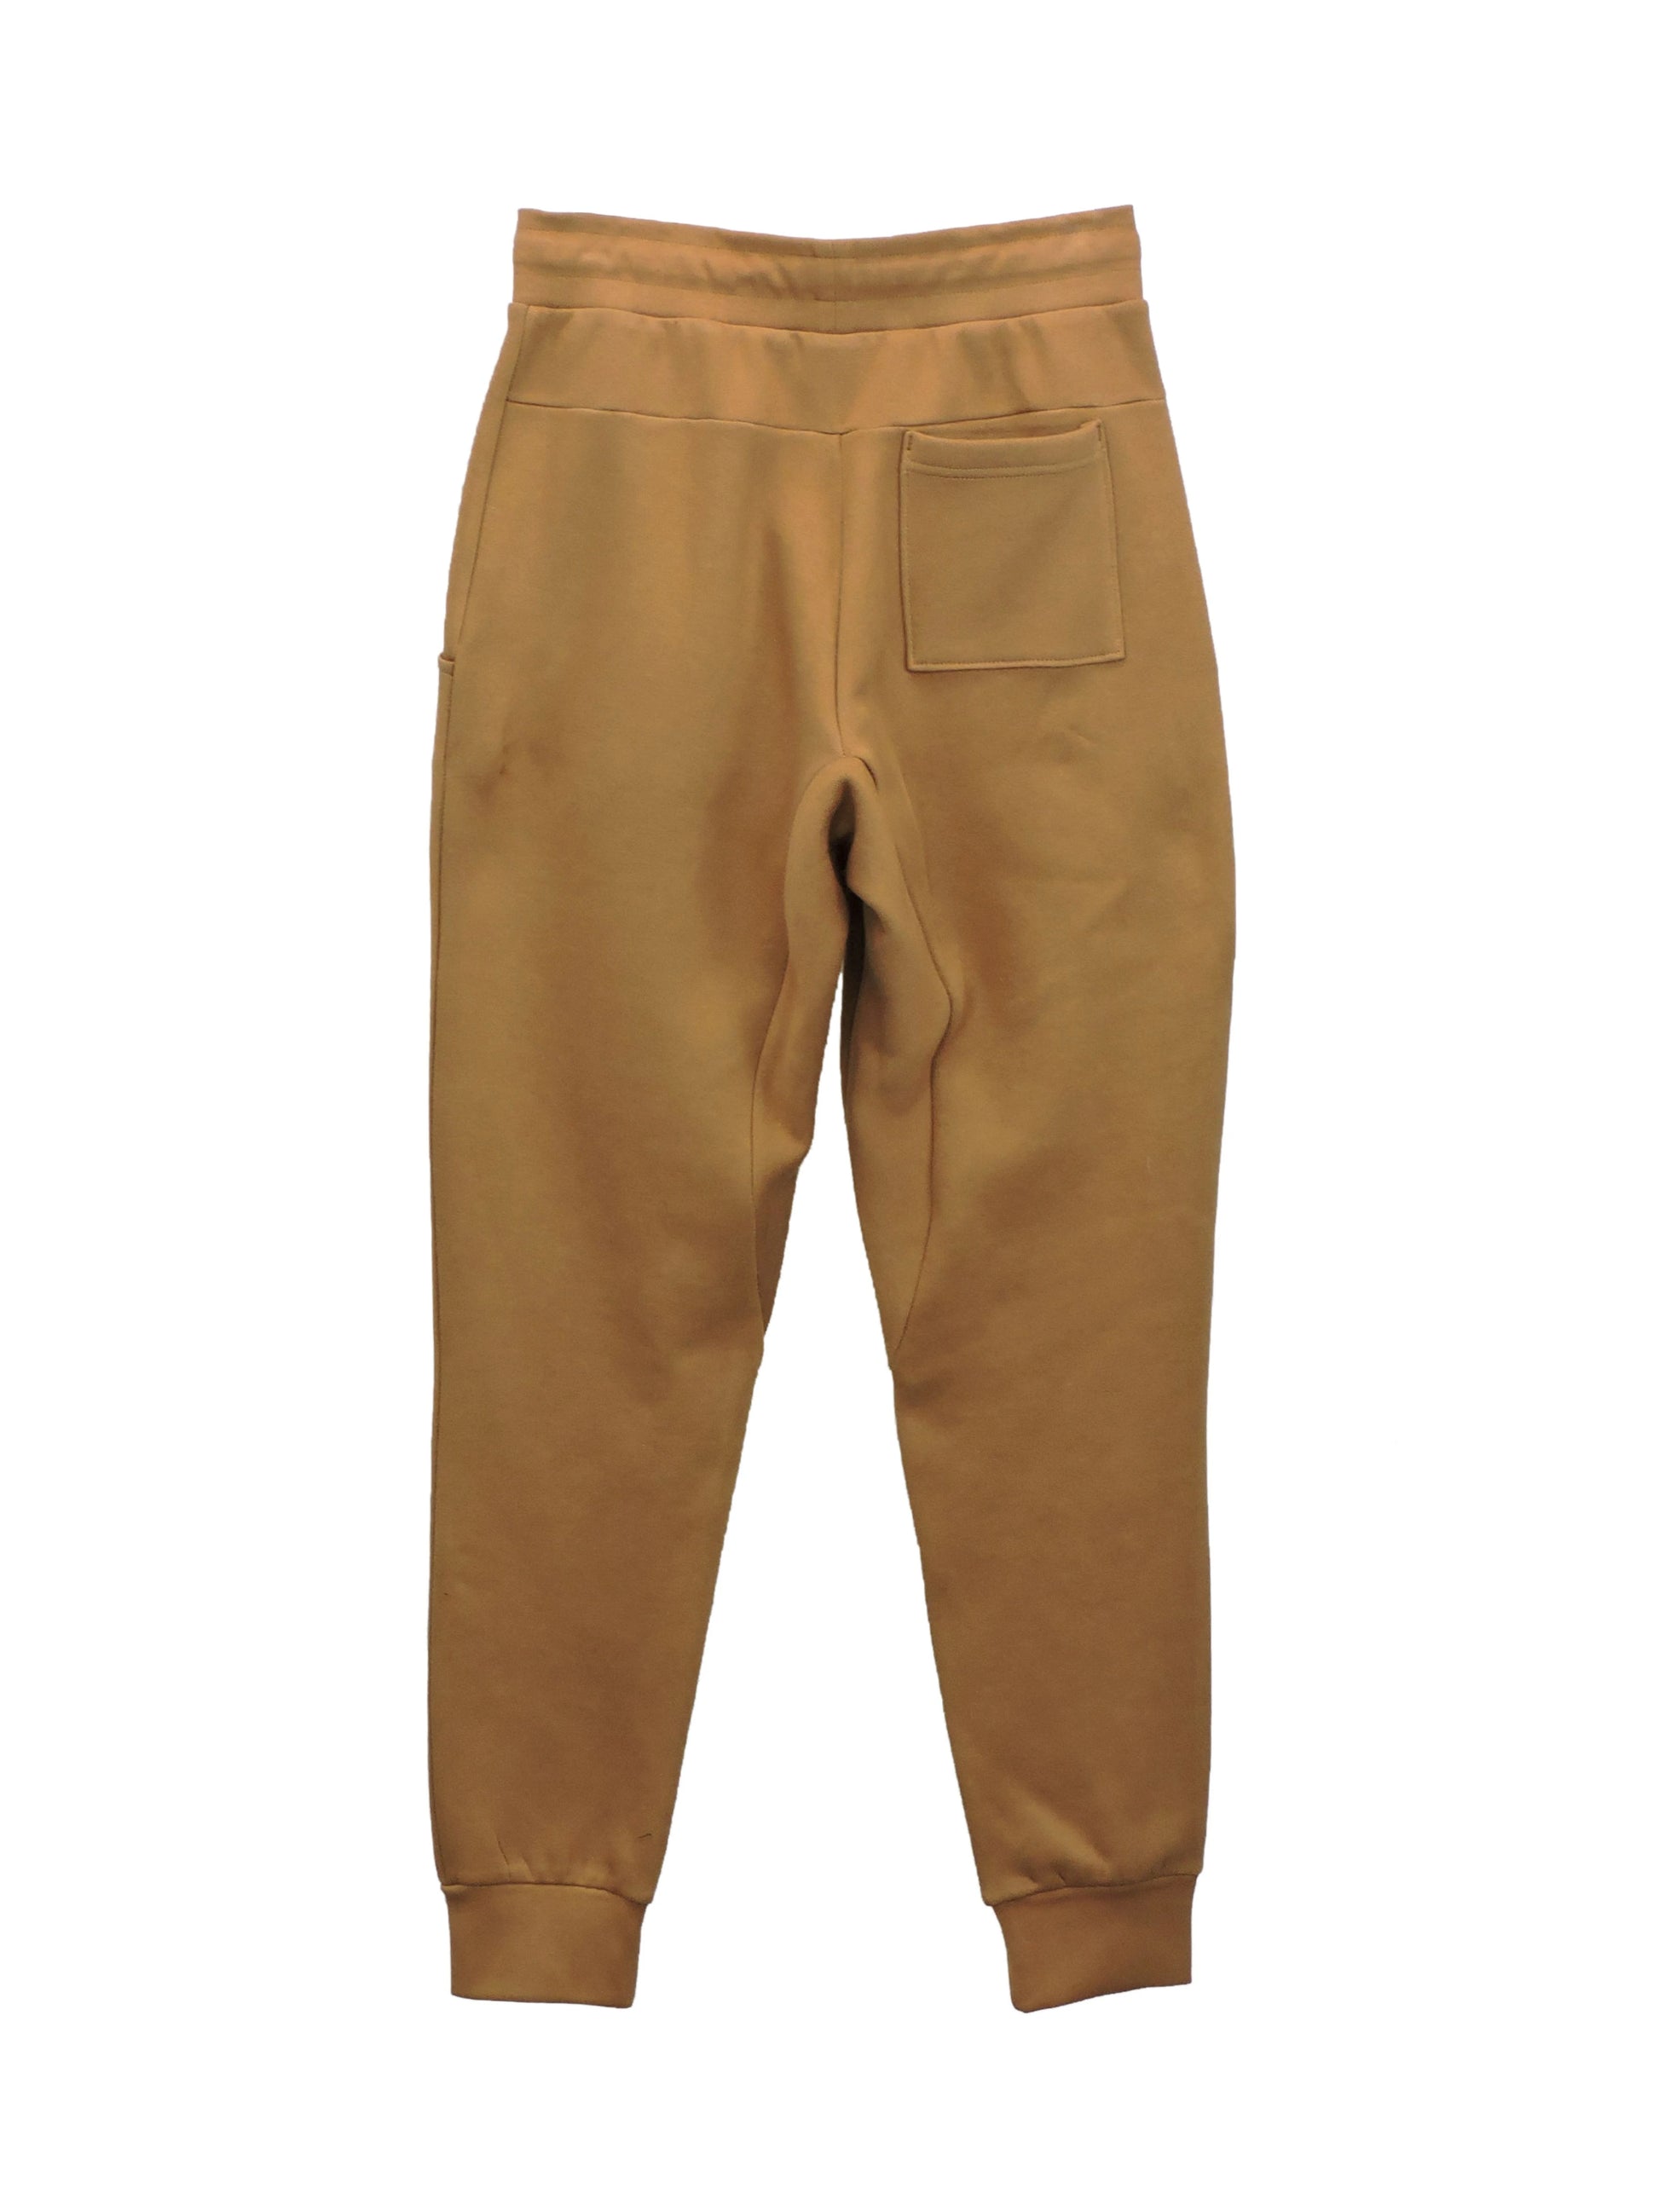 Back of Jogger showing two side pockets and one rear pocket. Fitted Ankle cuffs.